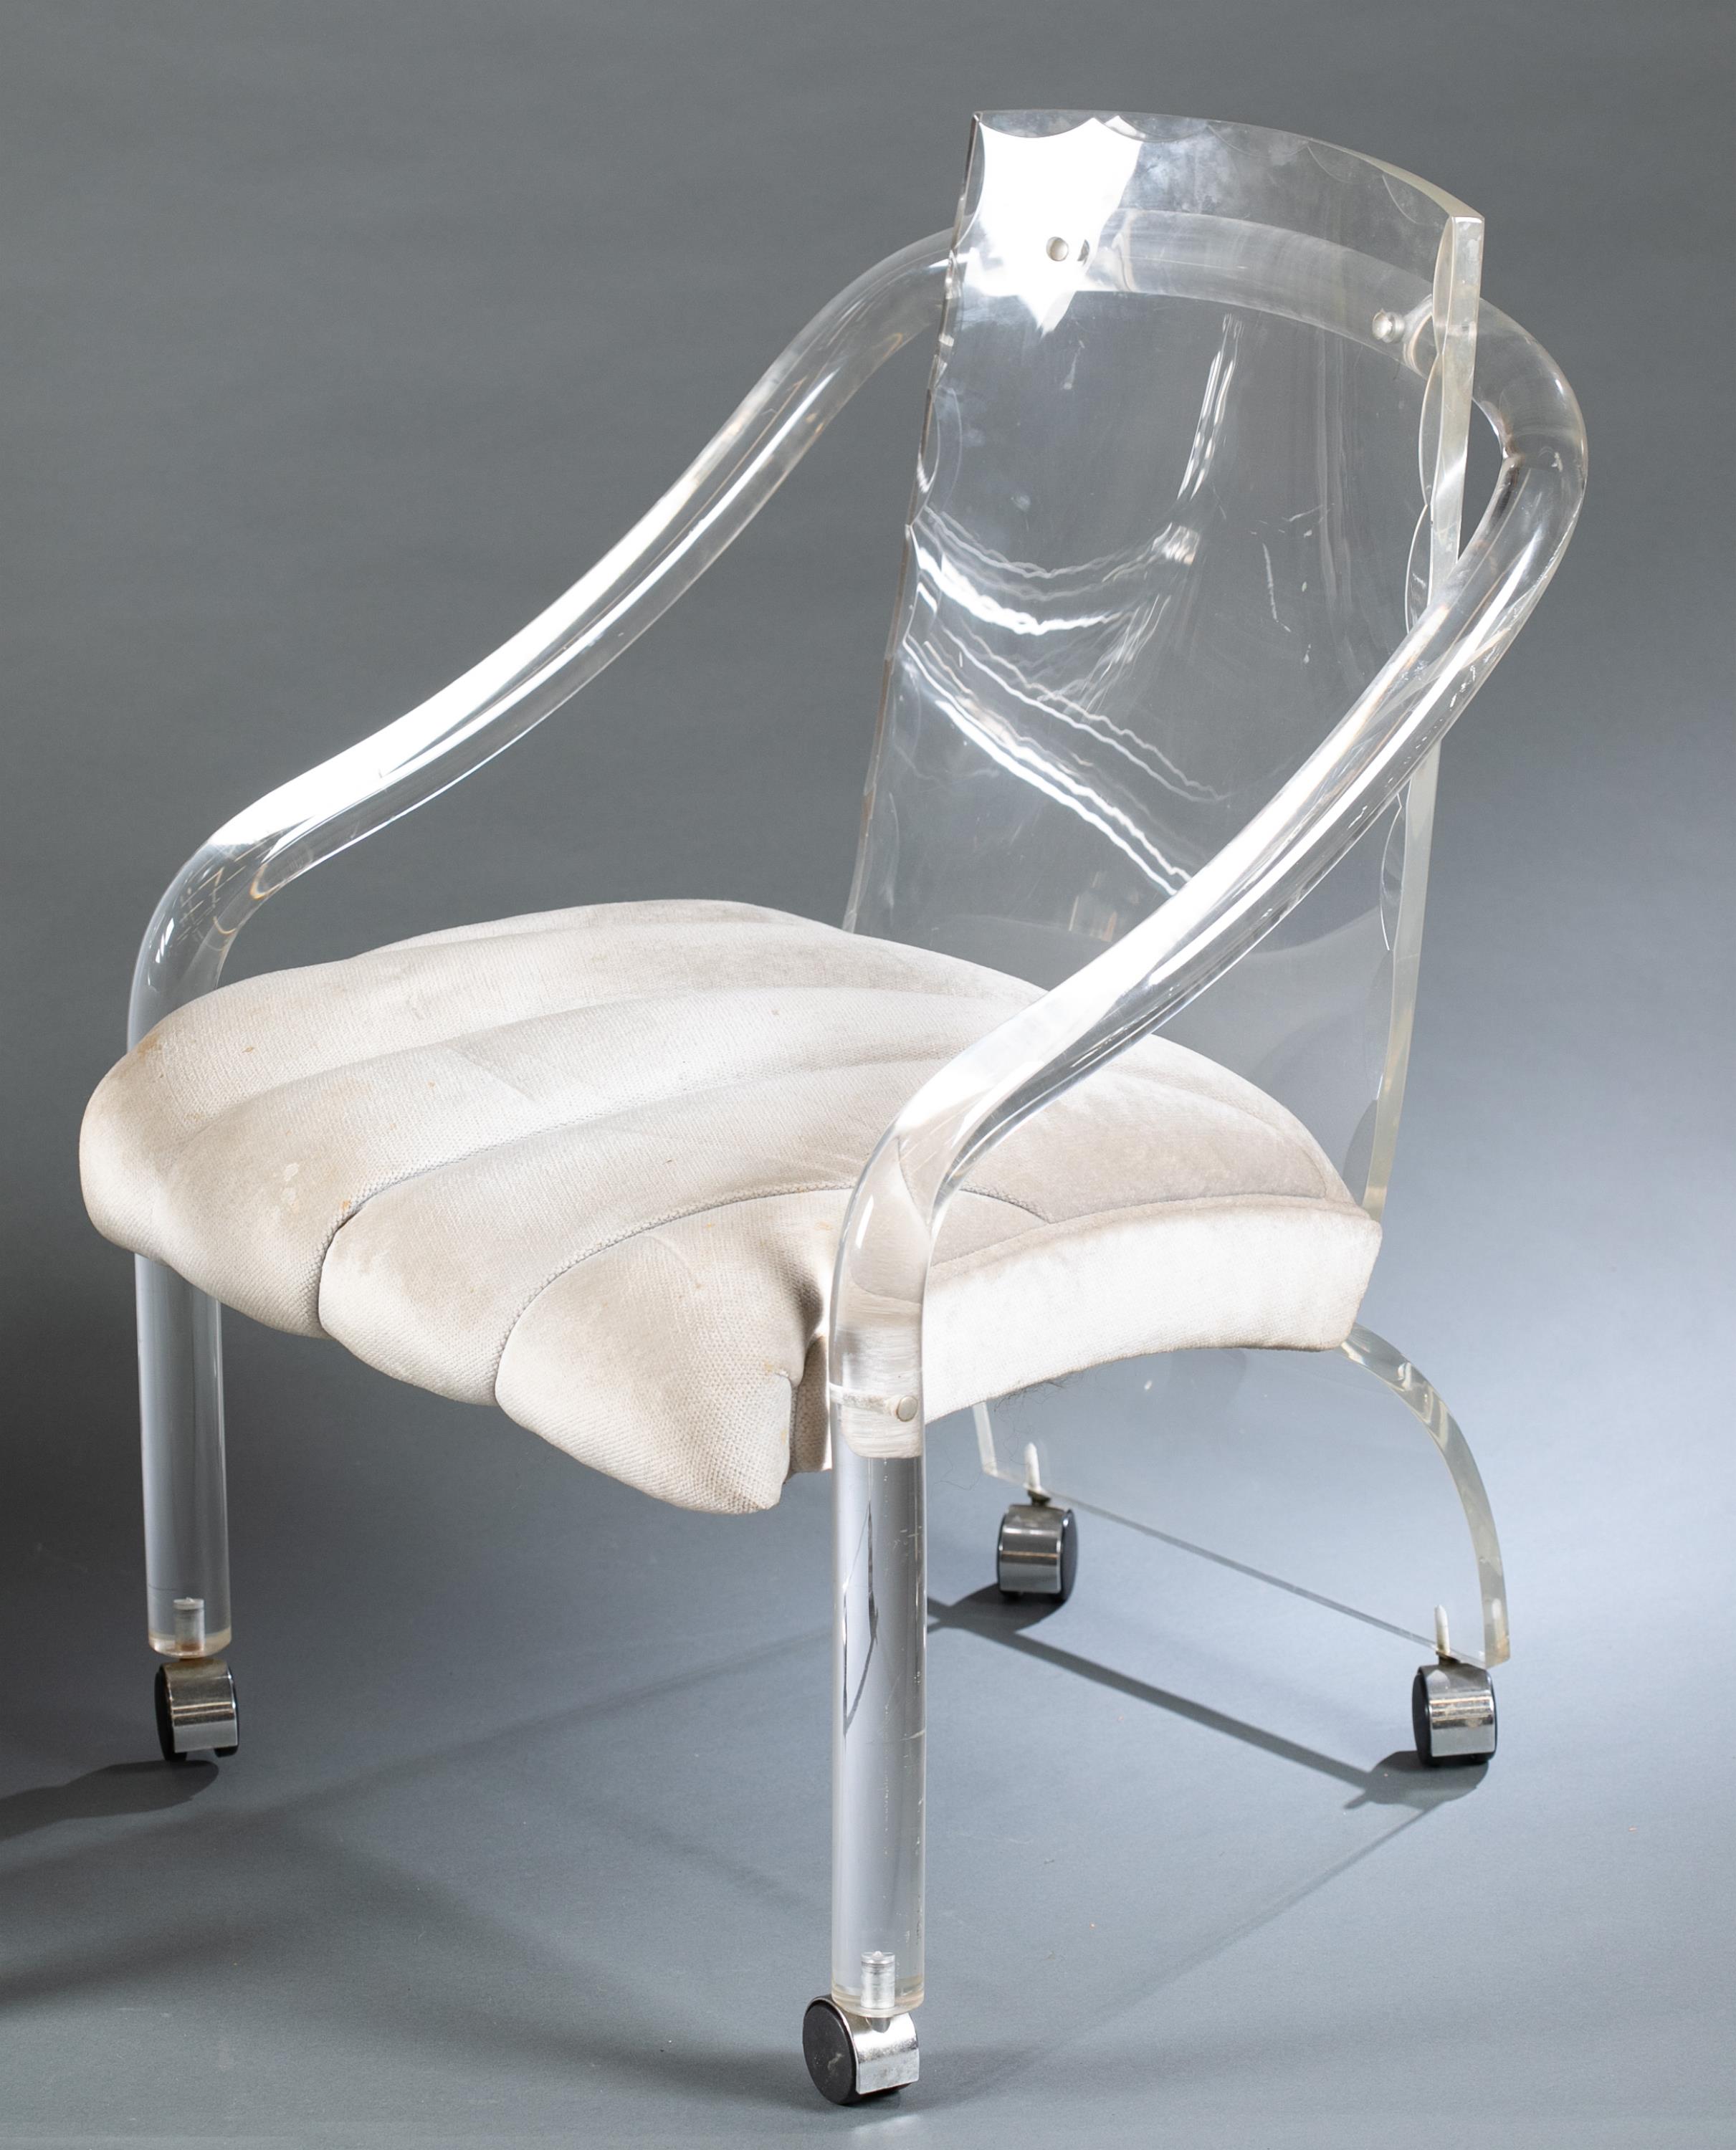 6 Hollywood Regency Hill Mfg. Co. Lucite chairs. - Image 2 of 6